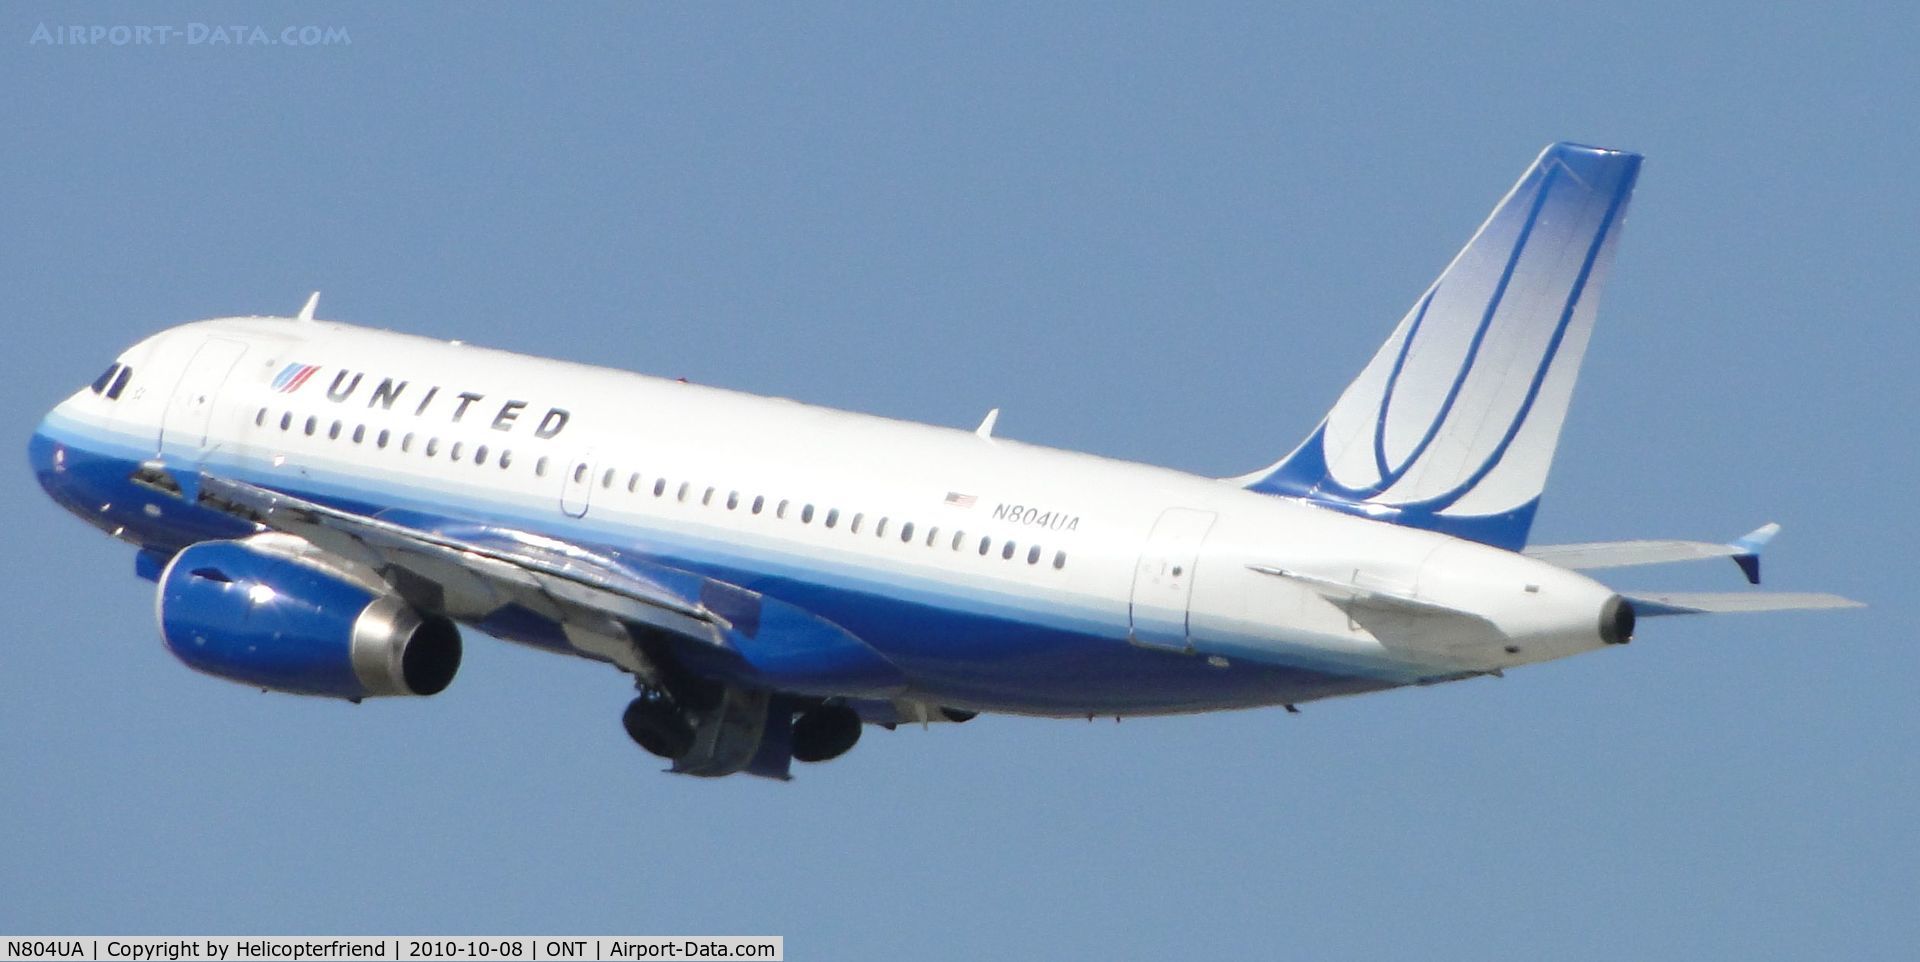 N804UA, 1997 Airbus A319-131 C/N 759, Taking off from runway 26R and wheels are being retracted for flight